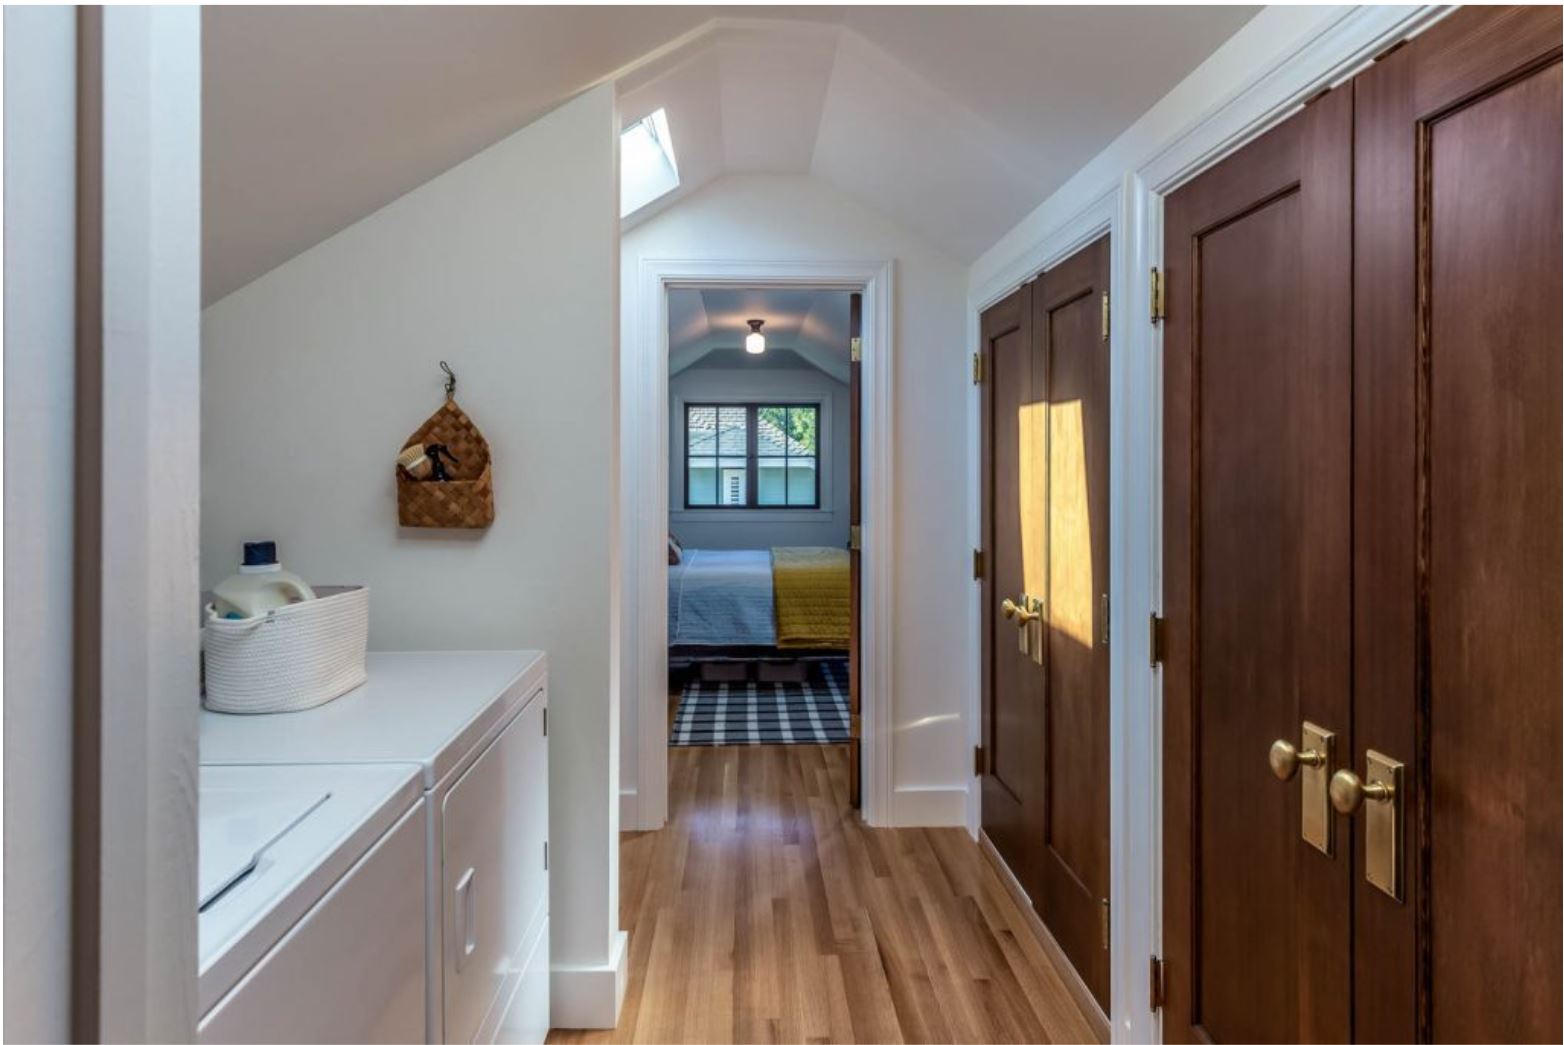 open sightlines create a direct flow from the bedroom to the newly remodeled bathroom